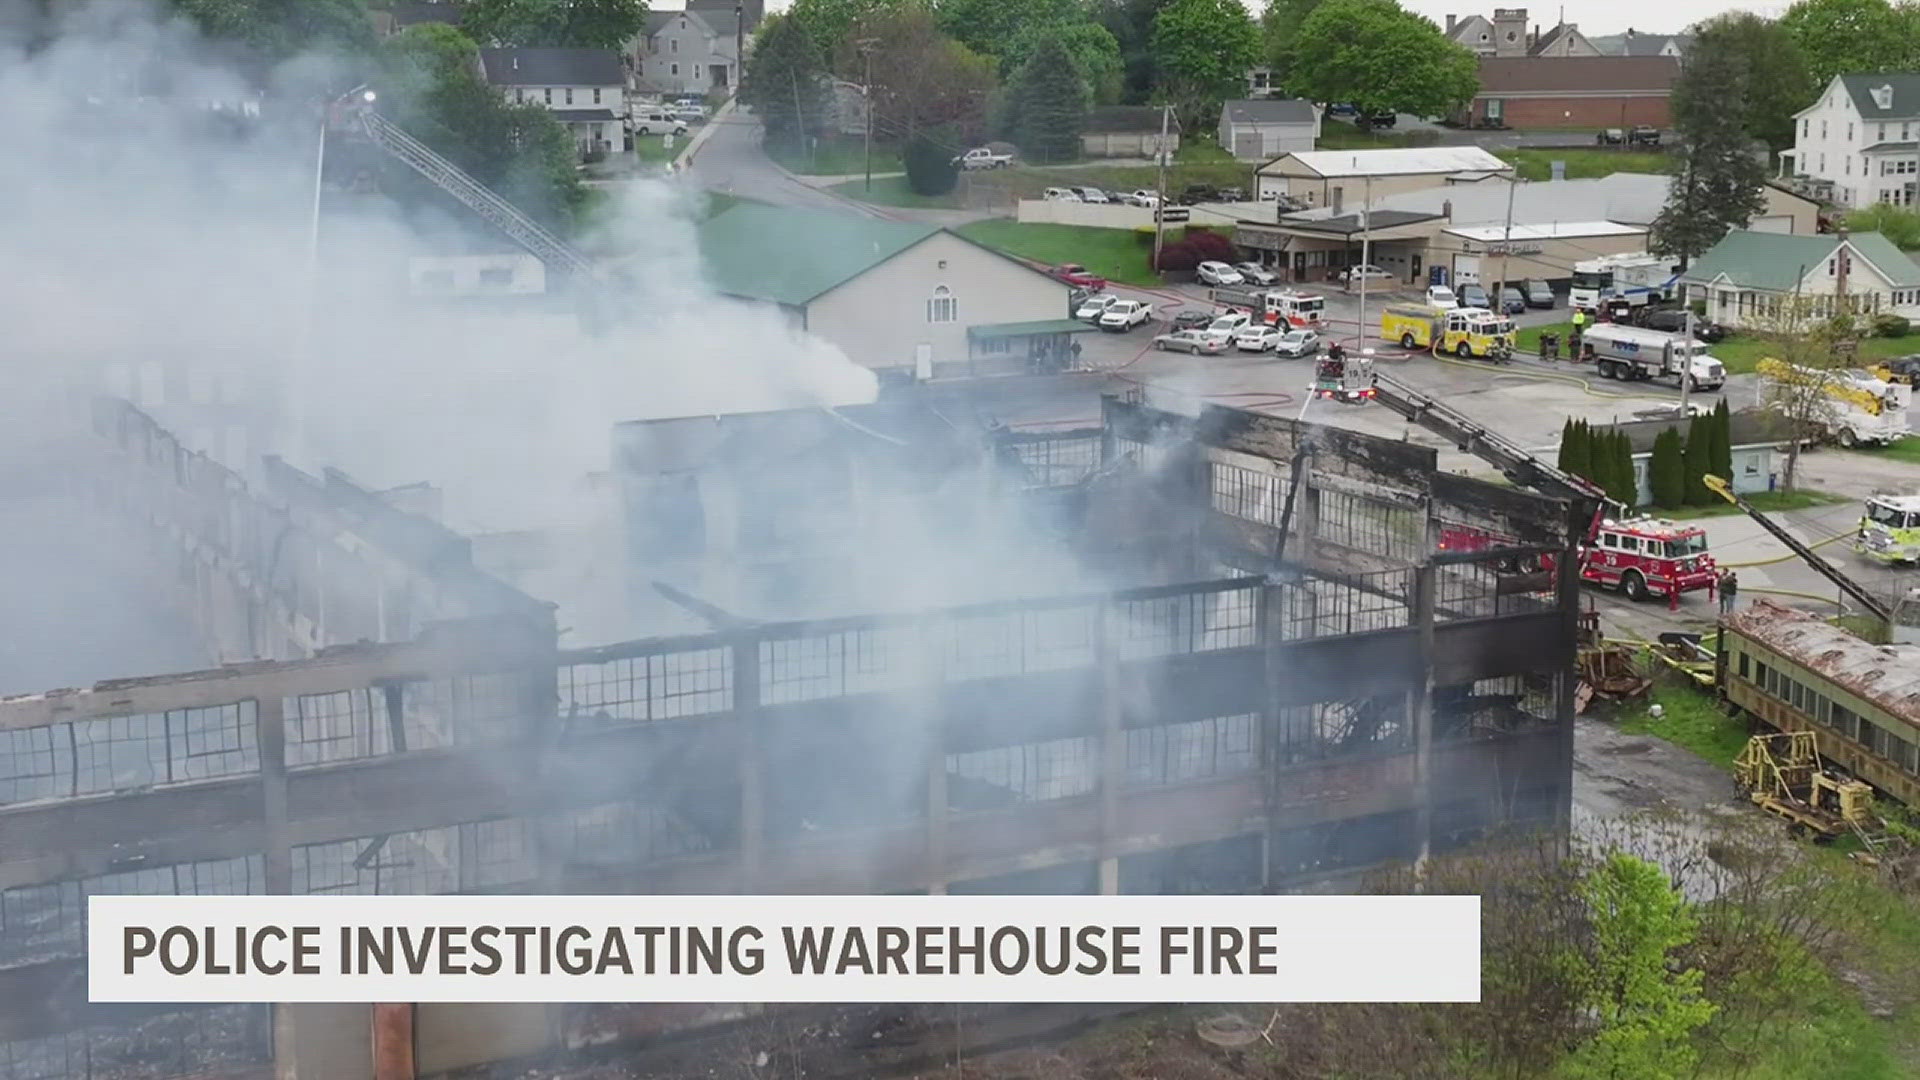 The Southern Regional Police said it is investigating the warehouse fire as an act of arson.